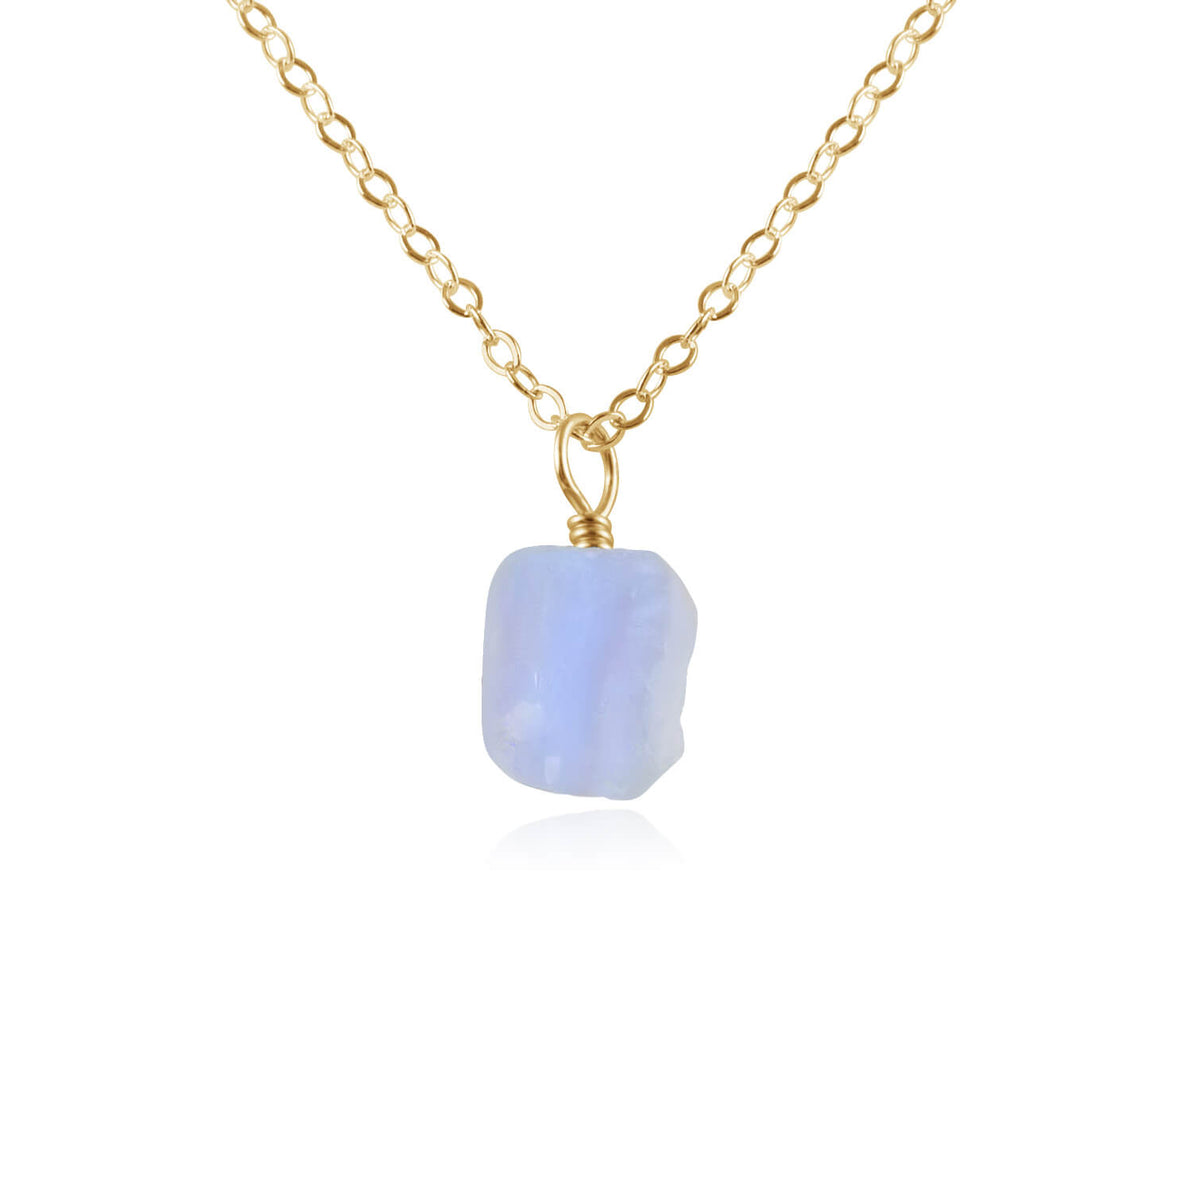 Raw Crystal Pendant Necklace - Blue Lace Agate - 14K Gold Fill - Luna Tide Handmade Jewellery